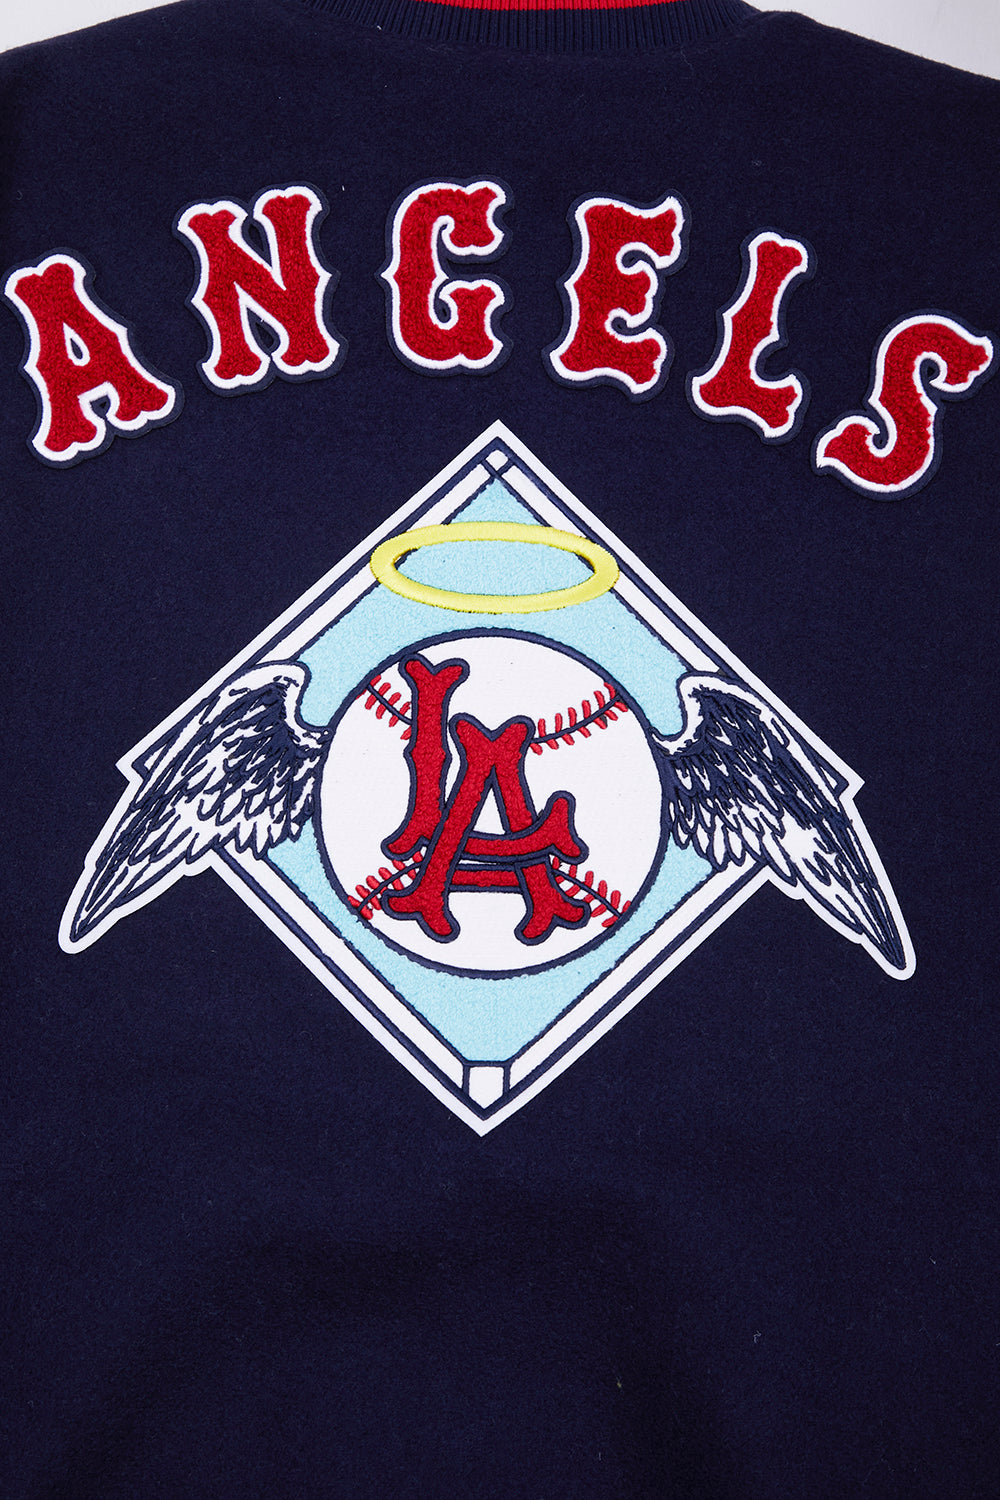 Men's Pro Standard Navy Los Angeles Angels Cooperstown Collection Retro Classic T-Shirt Size: Medium